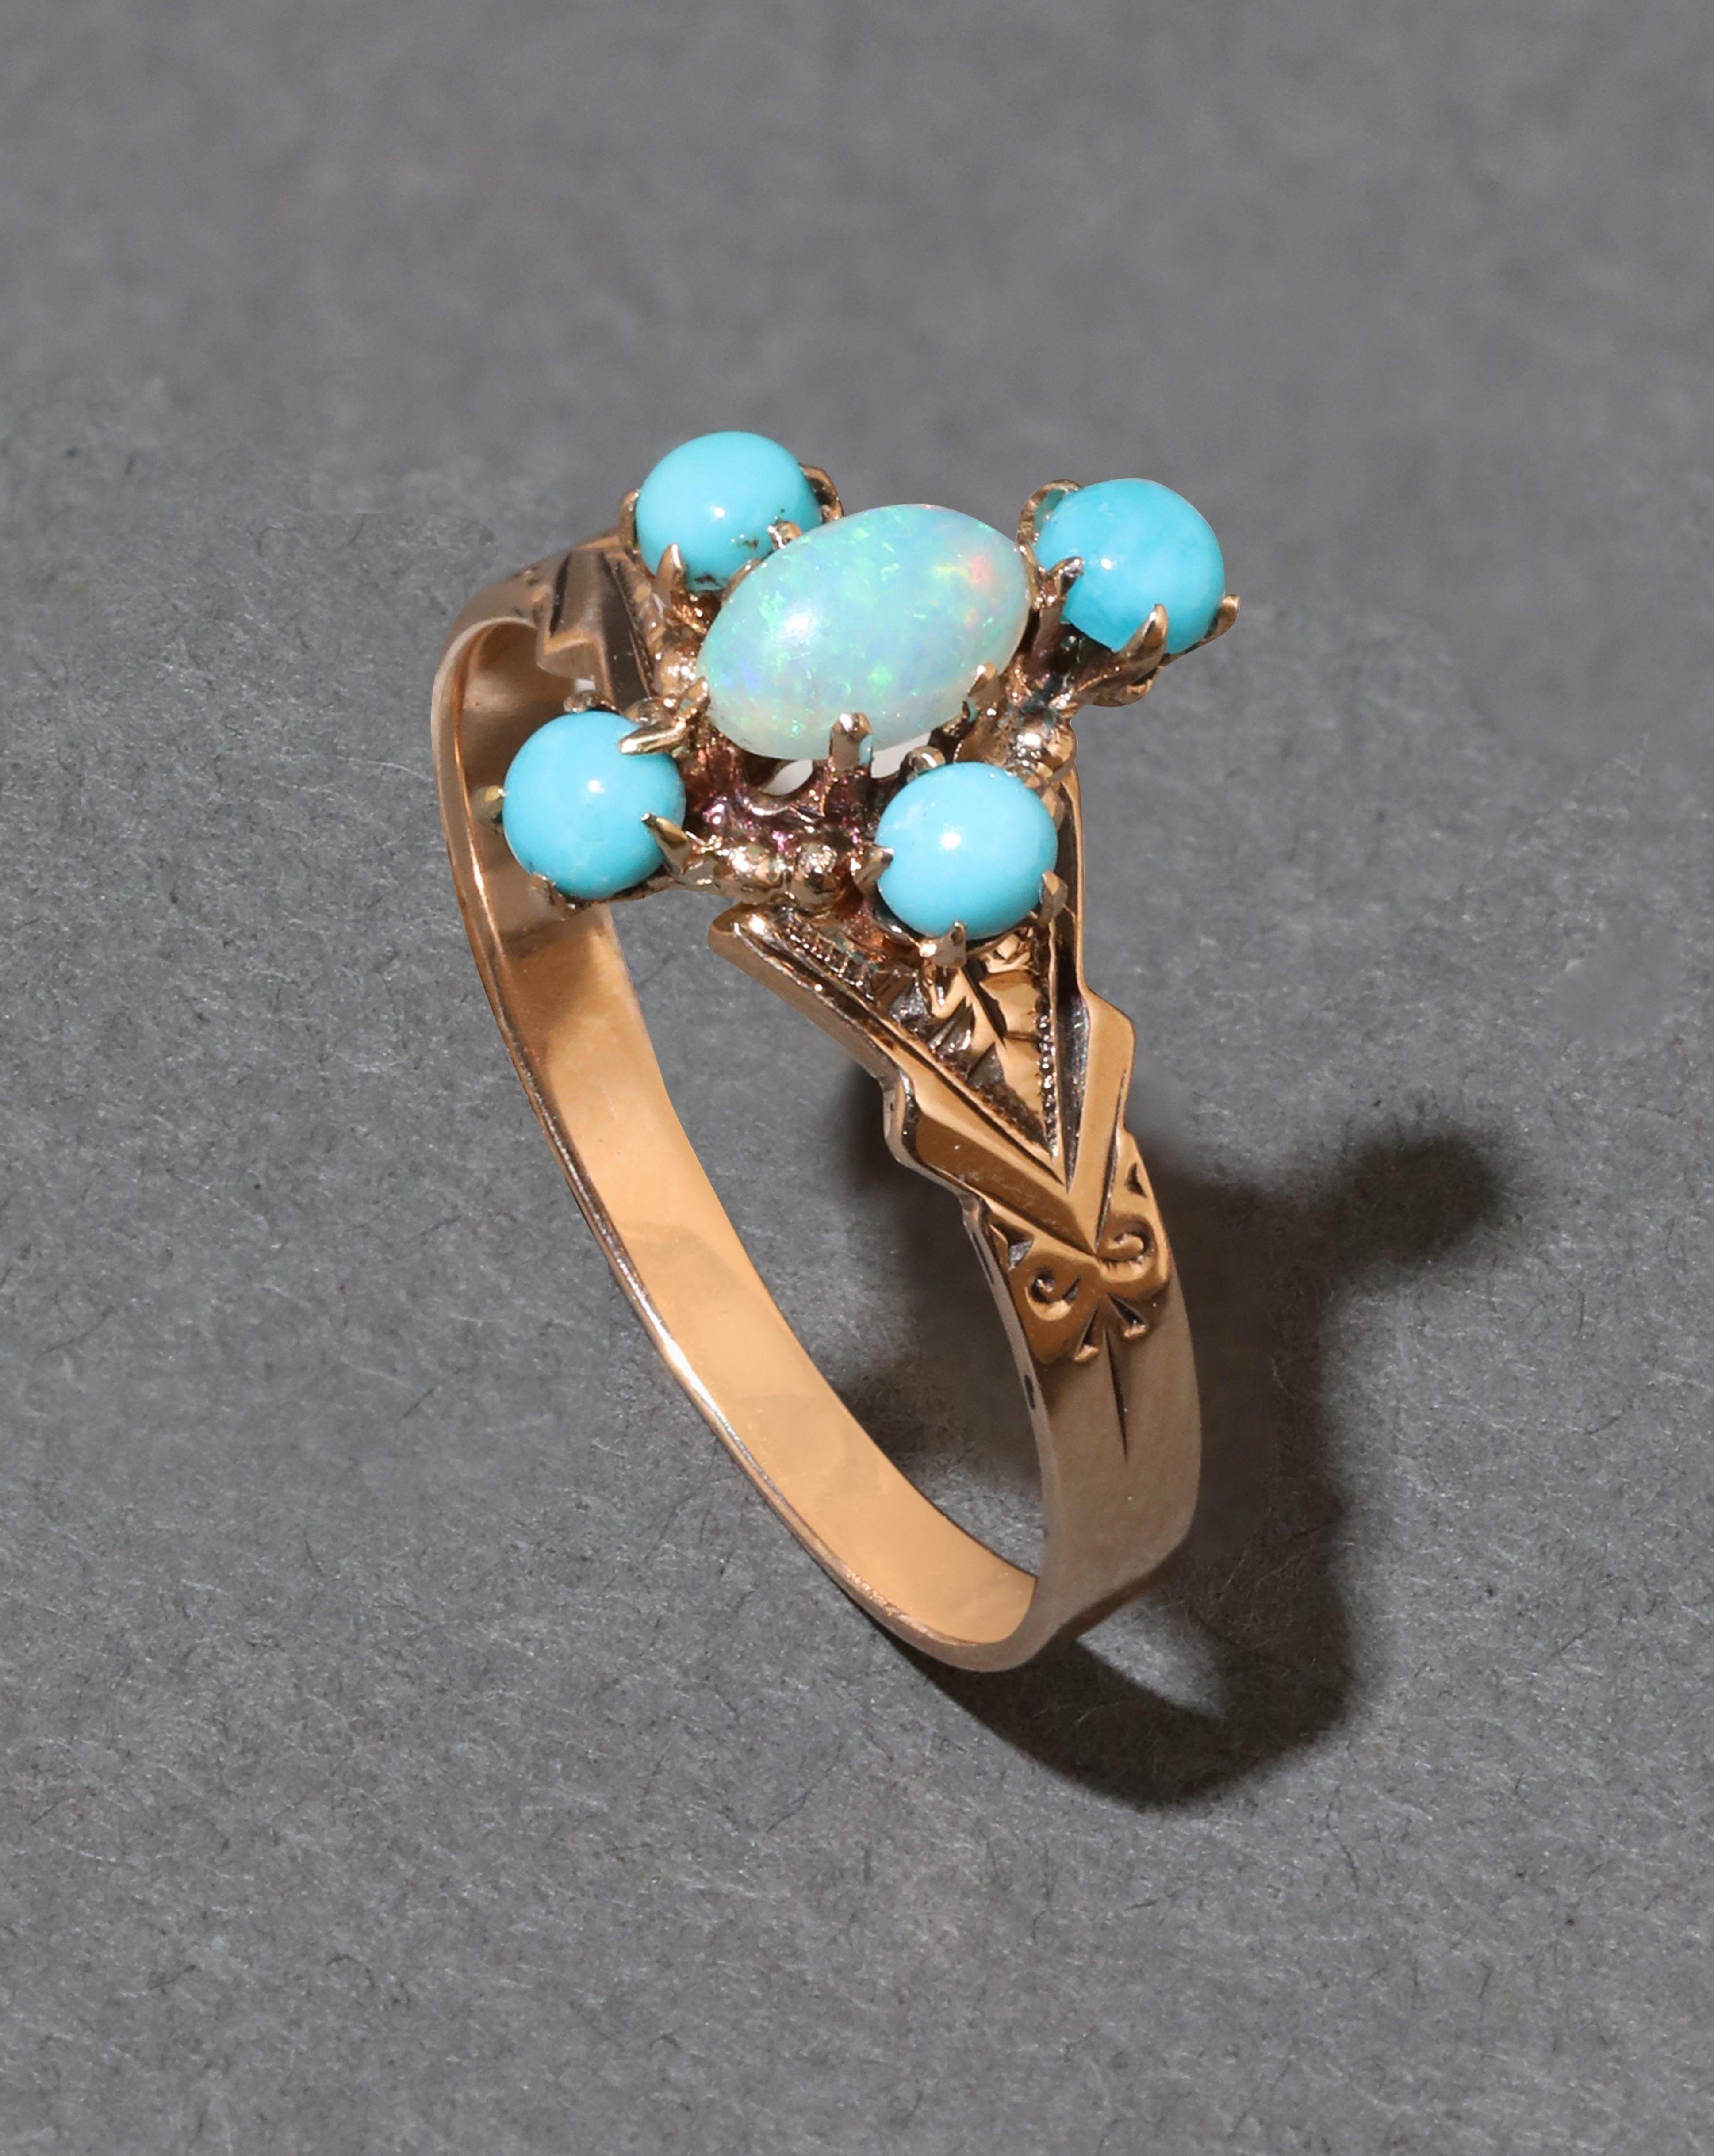 Antique Victorian Turquoise and Opal Ring in 14k Gold and Sterling Silver